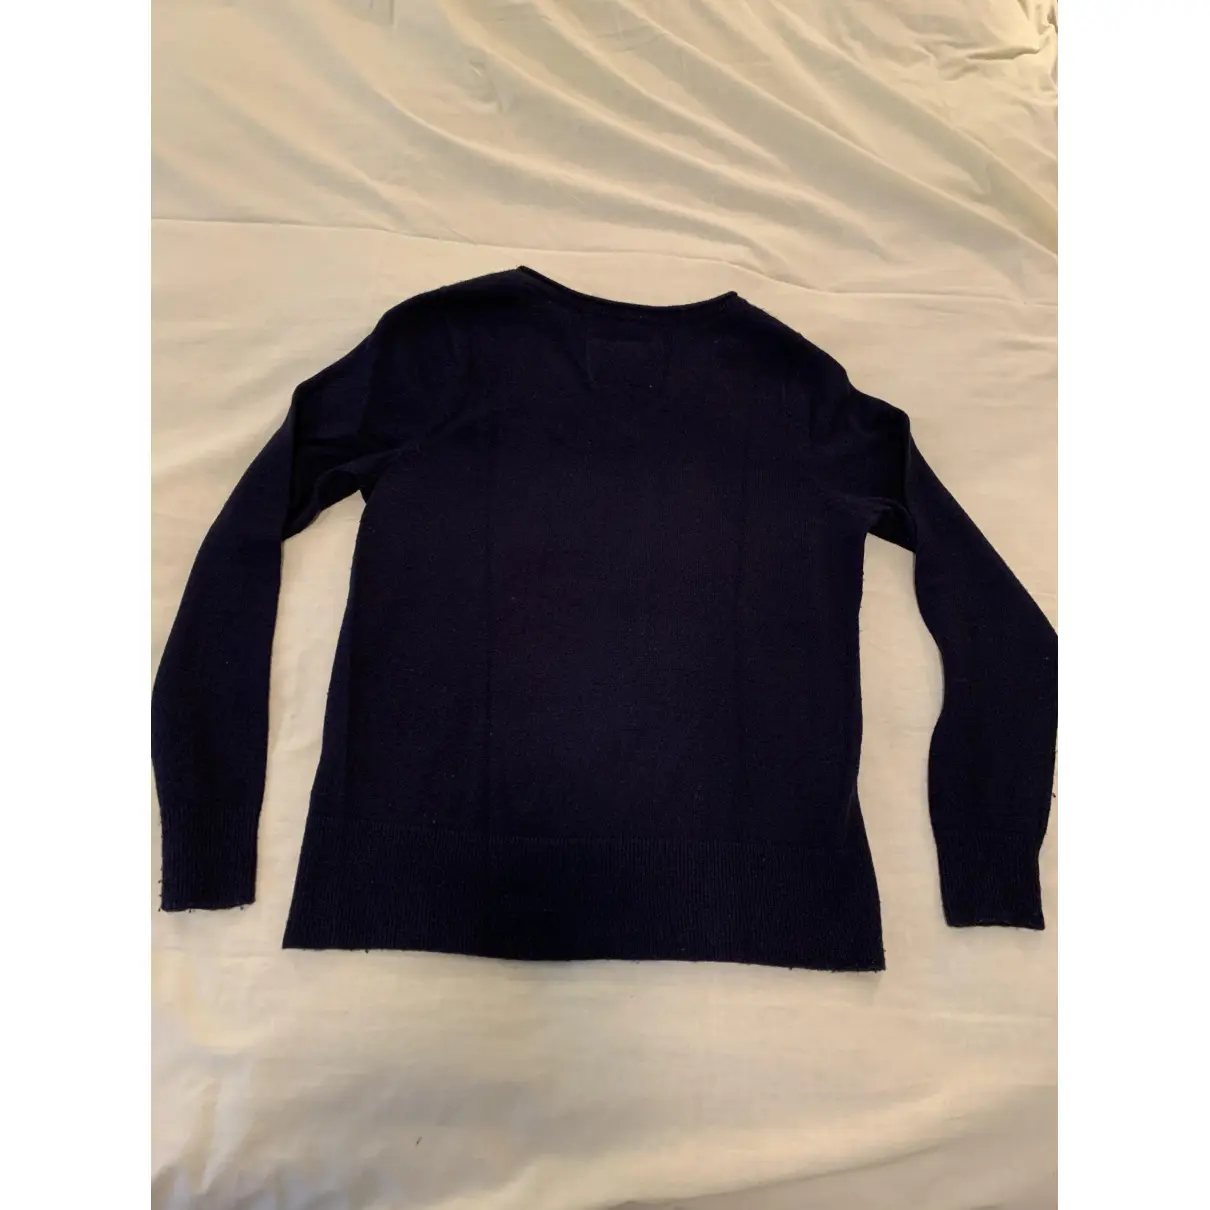 Buy Abercrombie & Fitch Cashmere jumper online